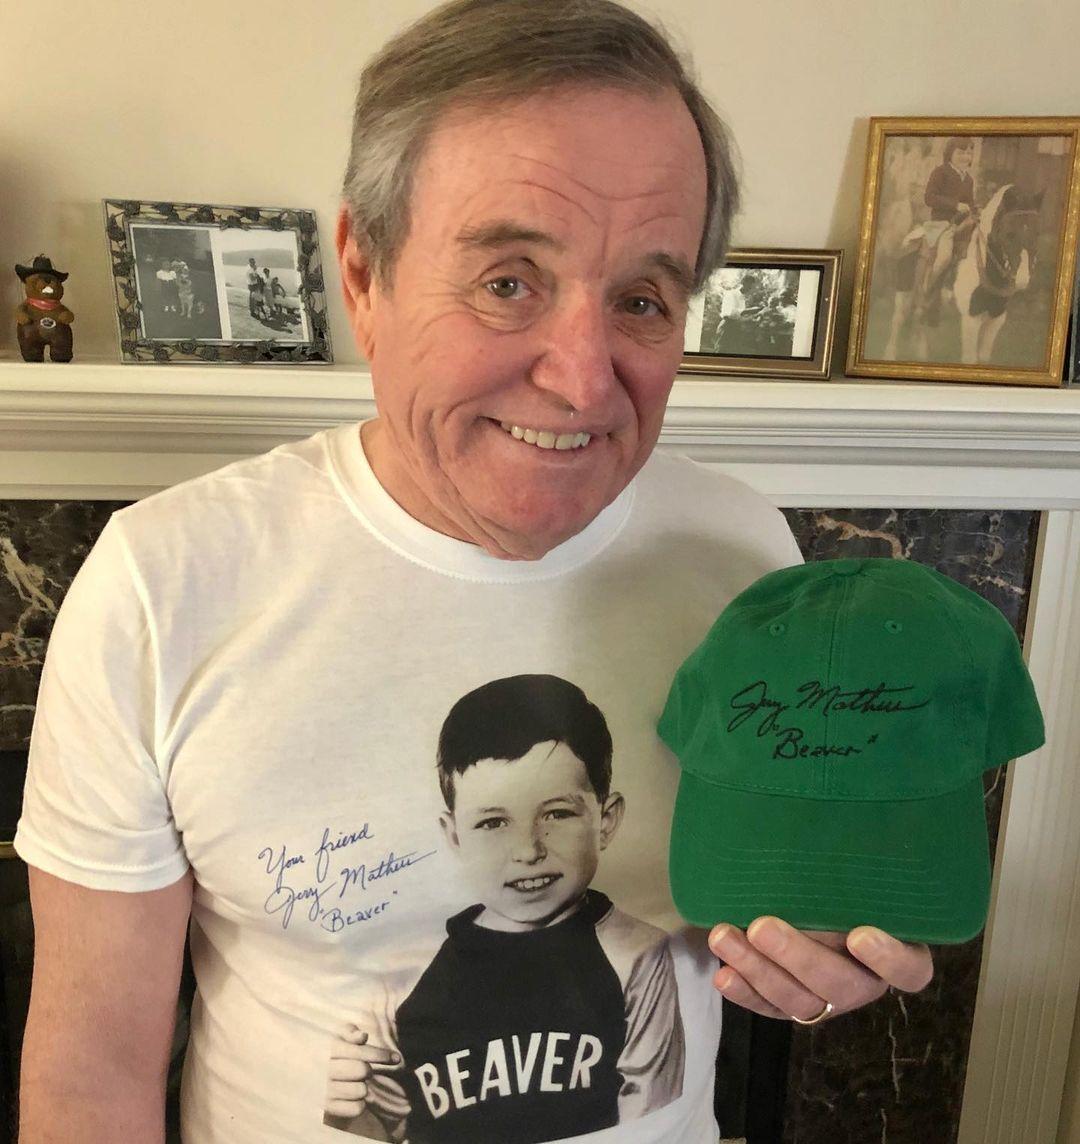 A photo showing Jerry Mathers sporting a white shirt and holding a green cap.